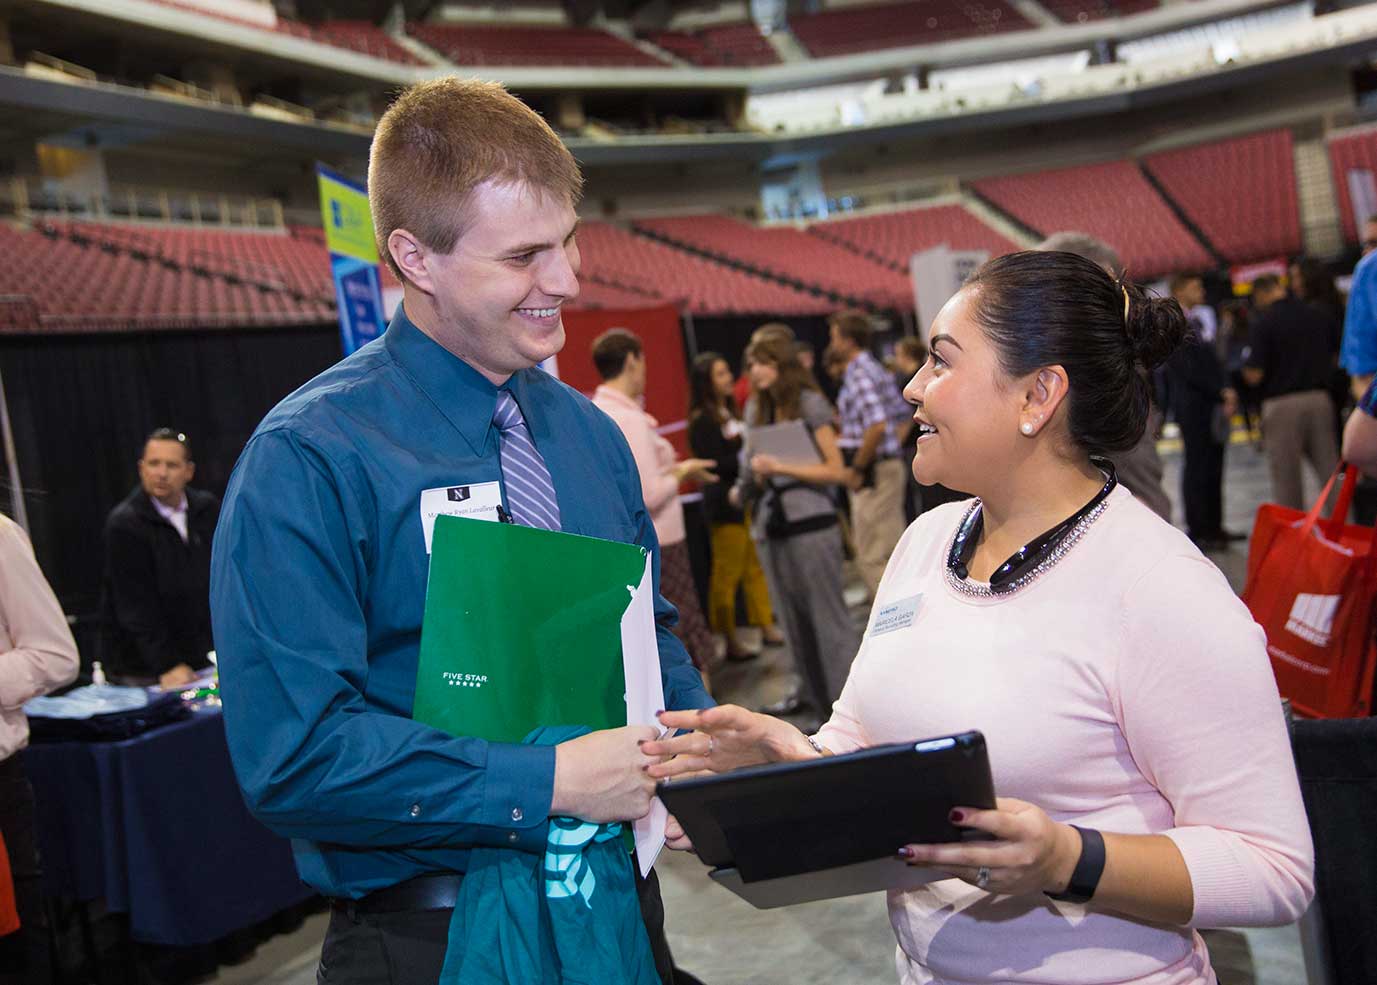 Upcoming events to help prepare your student to connect with employers